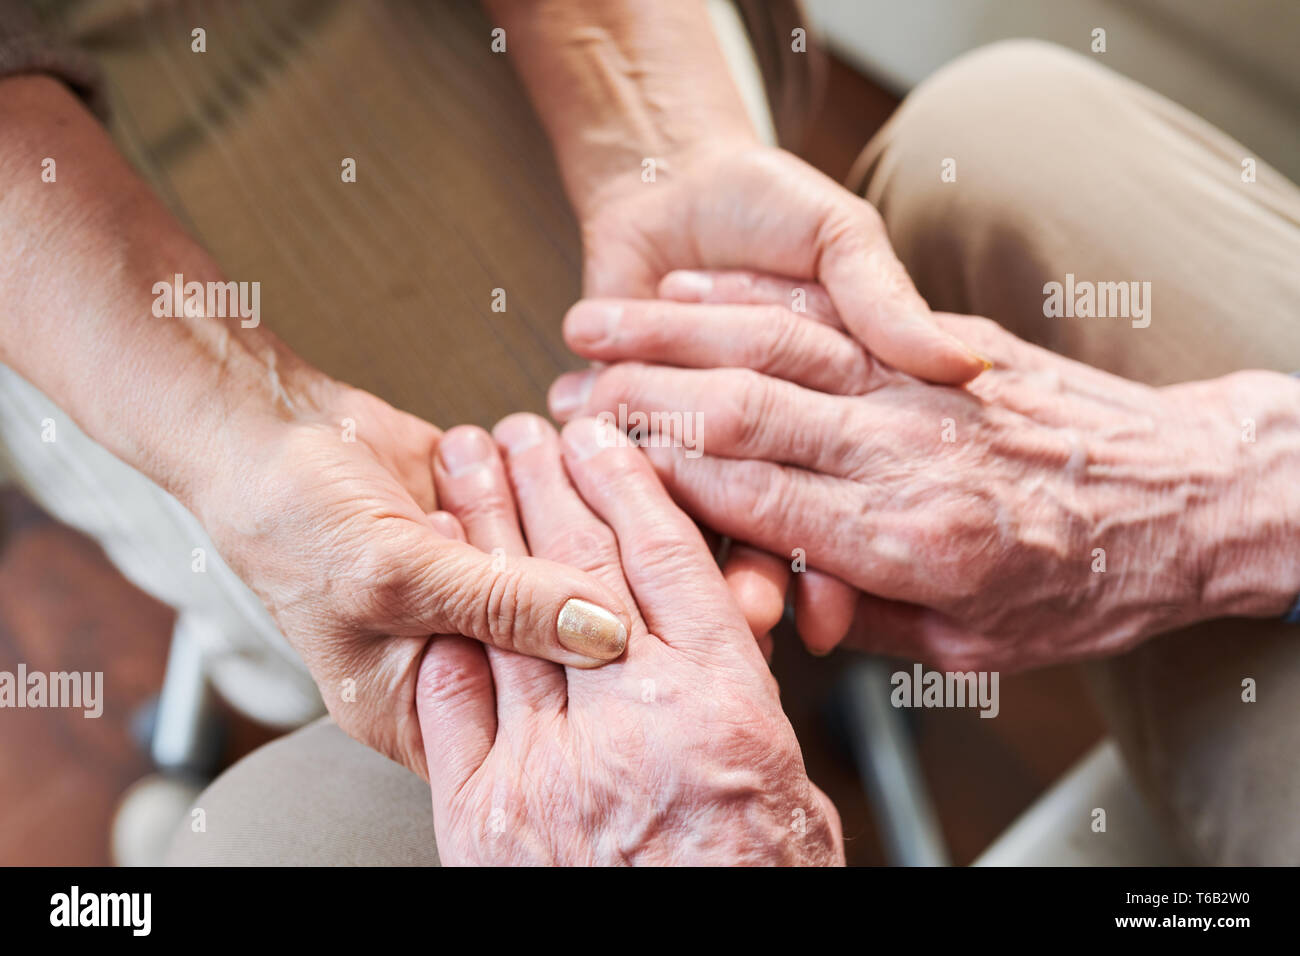 Caring of spouse Stock Photo